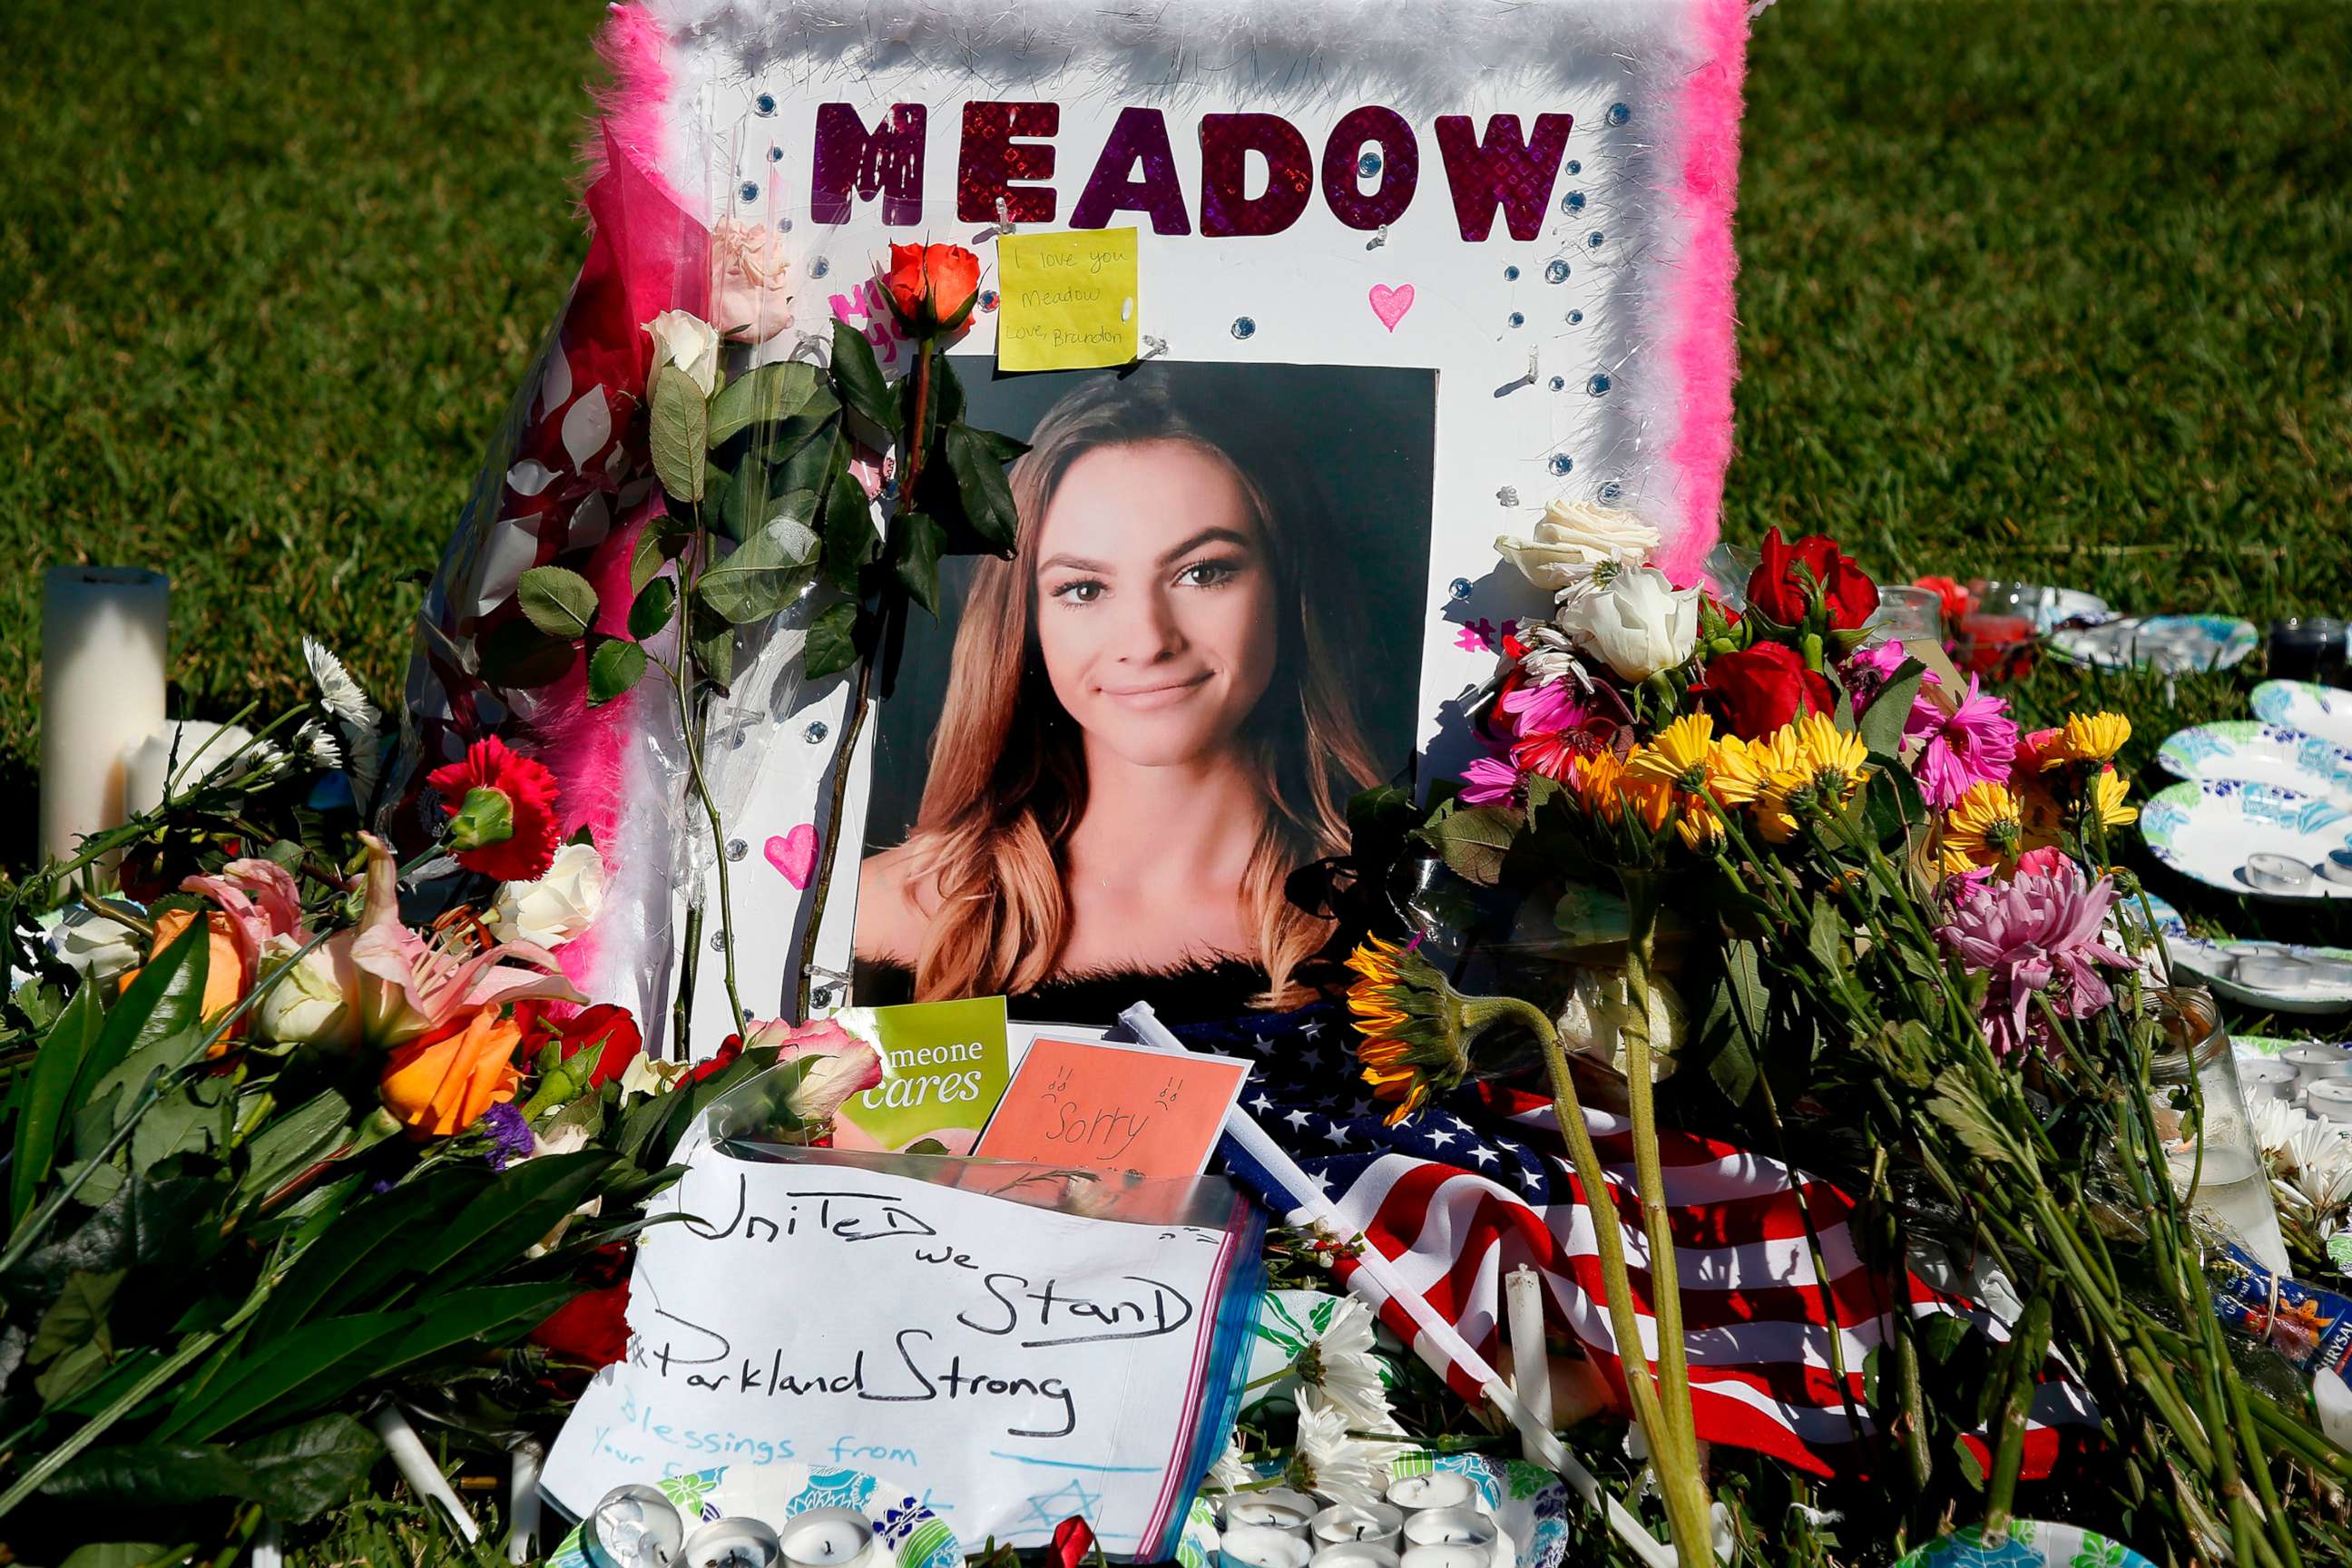 PHOTO: A memorial for Meadow Pollack, one of the victims of the Marjory Stoneman Douglas High School shooting, sits in a park in Parkland, Fla., Feb. 16, 2018.